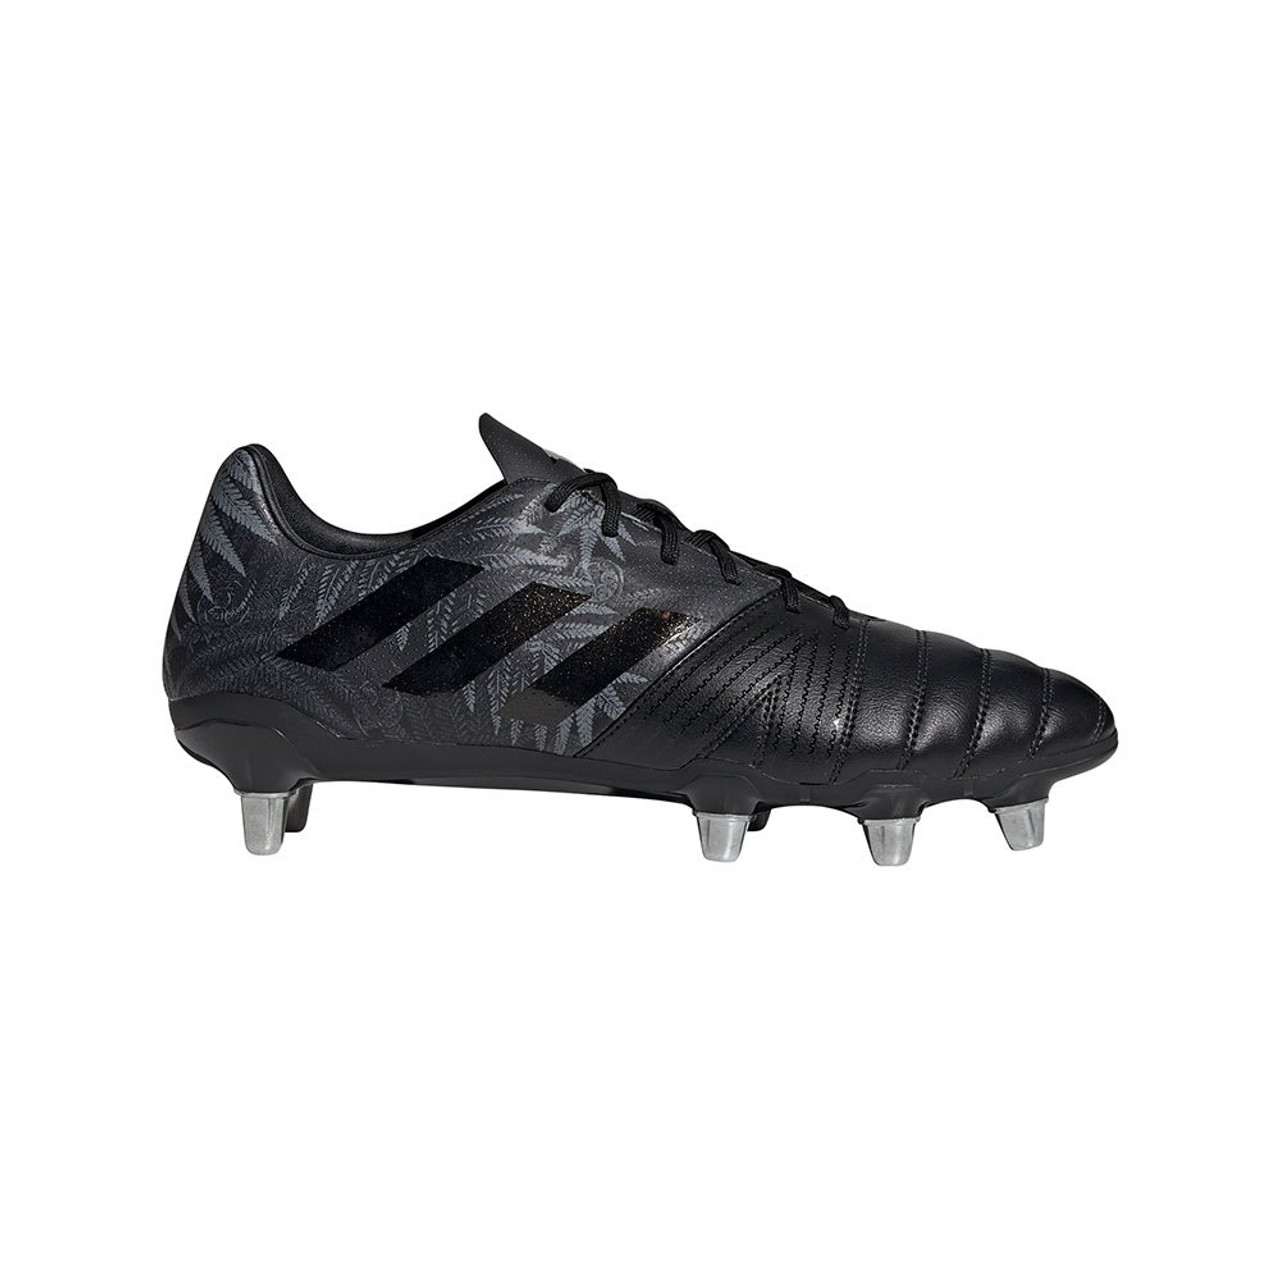 All Blacks SG Boots - Black on sale at Rugby City | 74.99